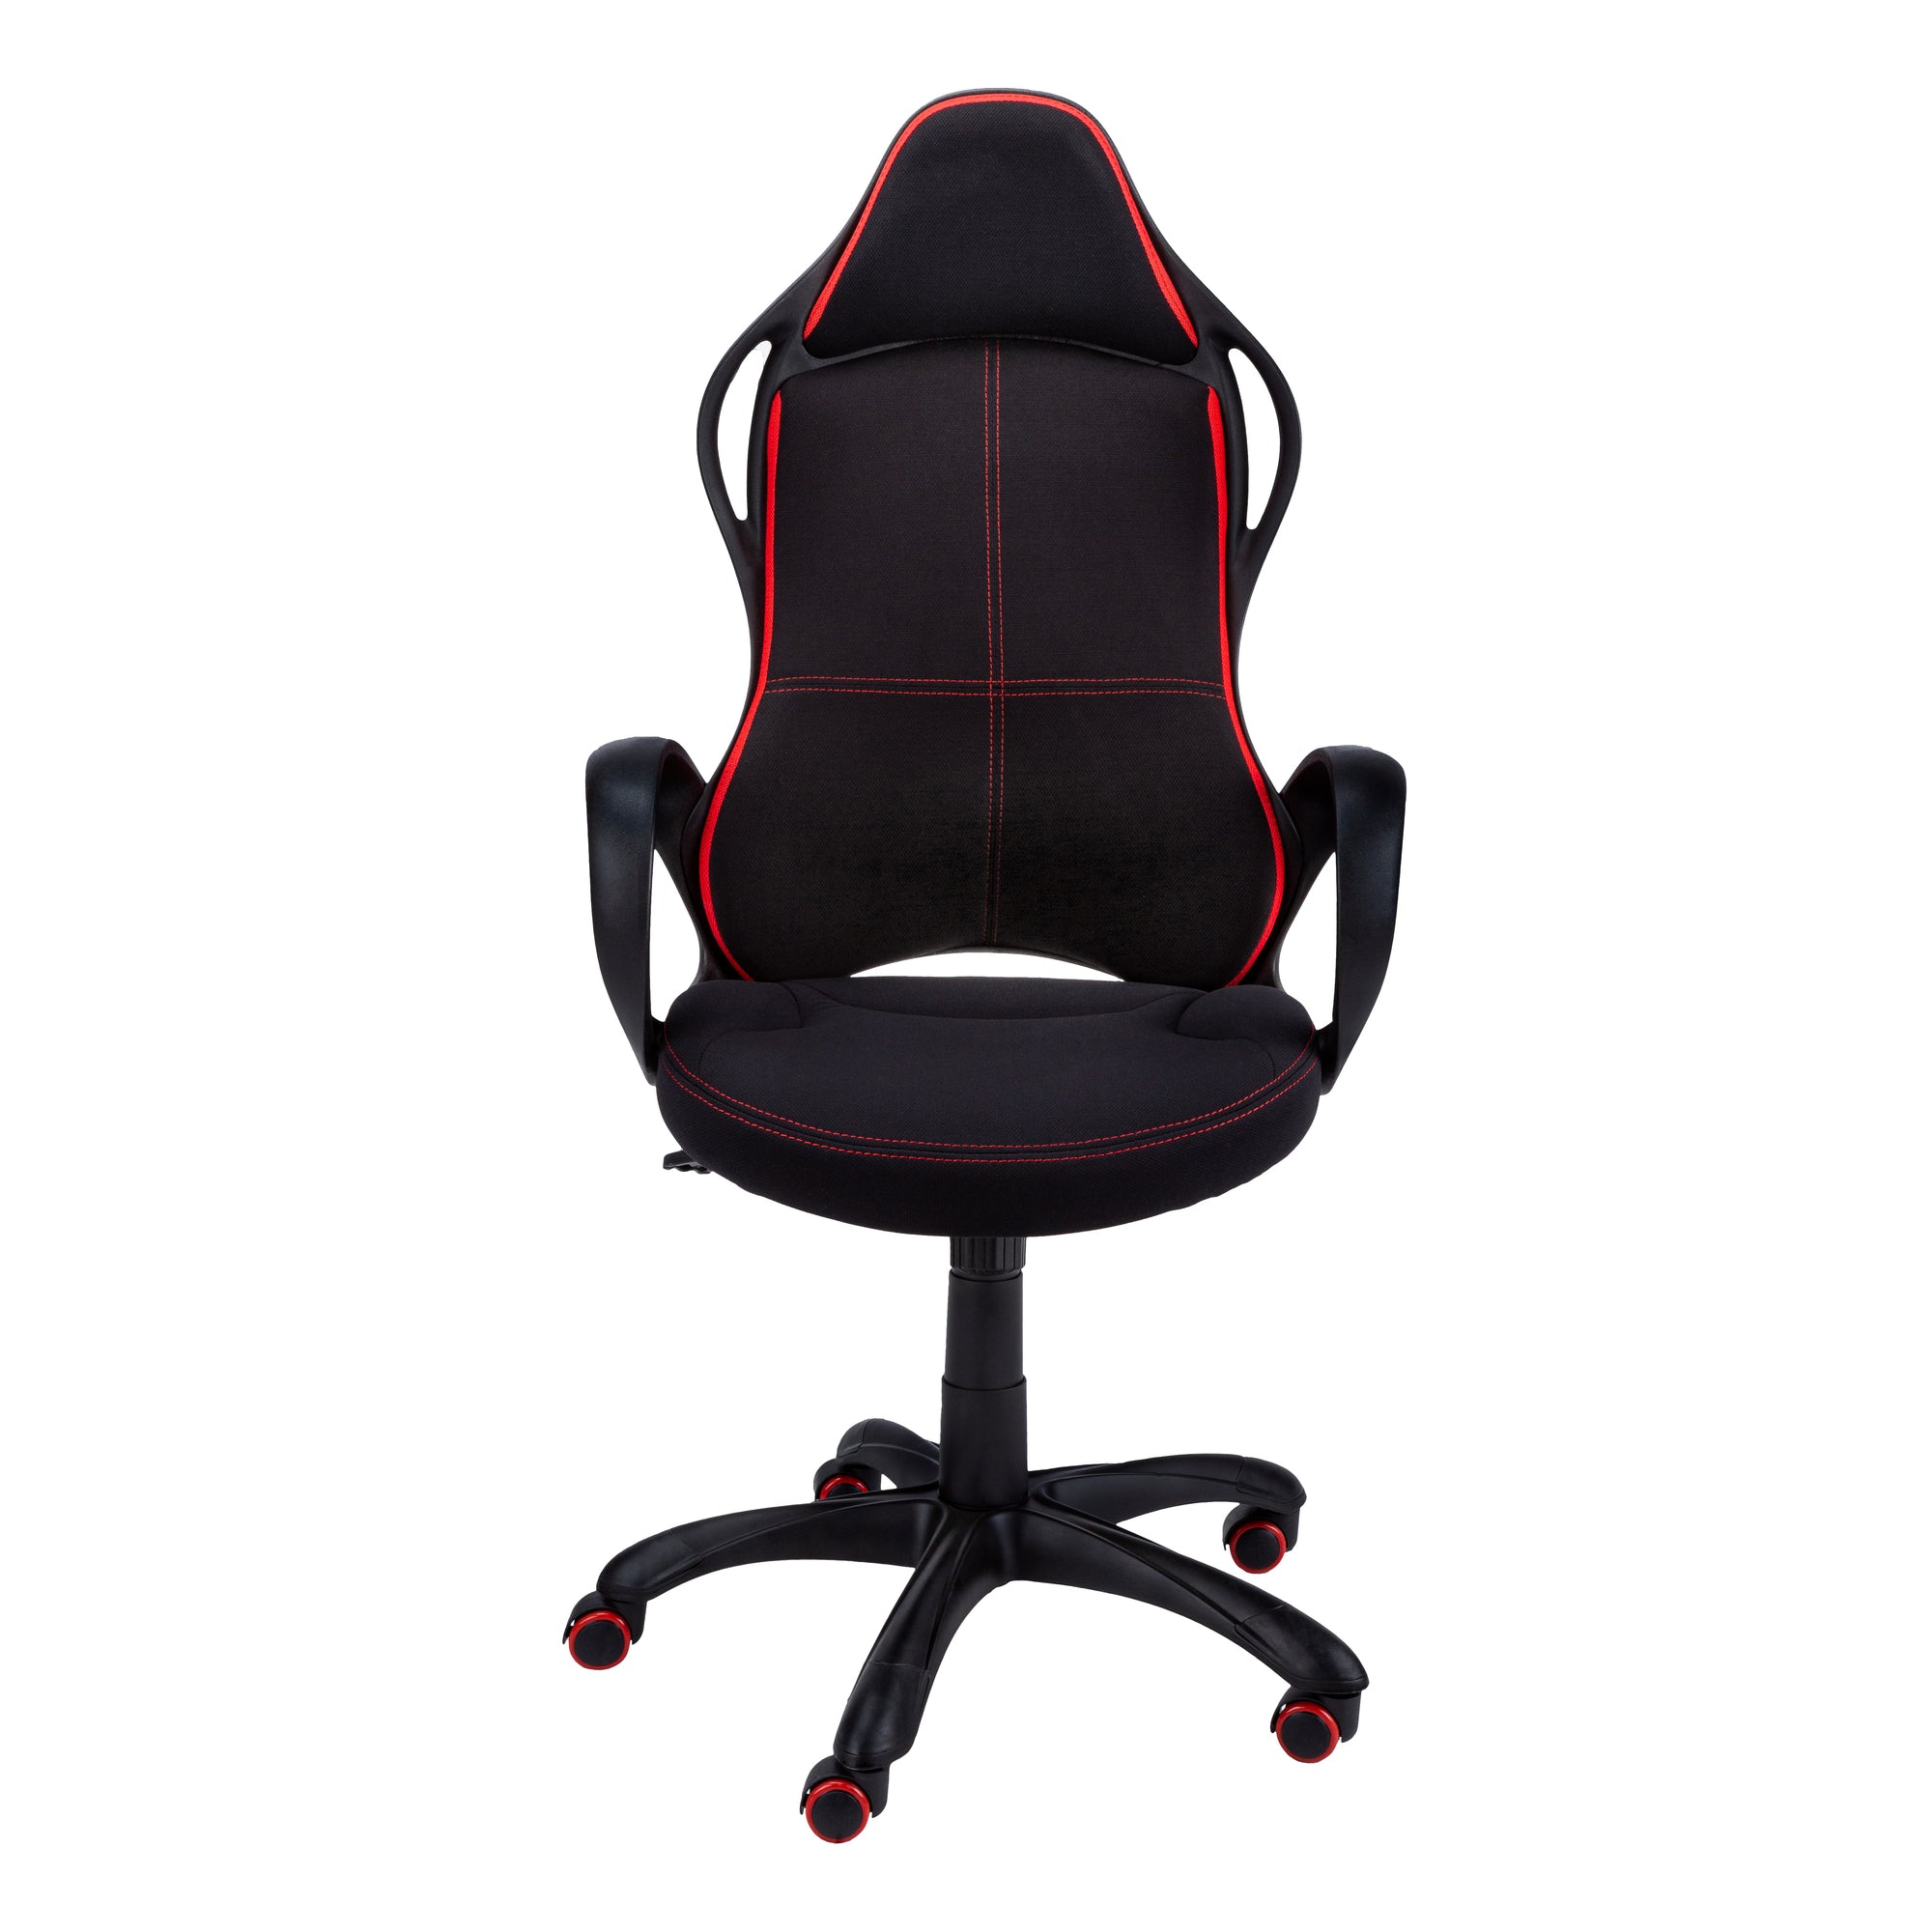 Black Fabric Tufted Seat Swivel Adjustable Gaming Chair Fabric Back Plastic Frame